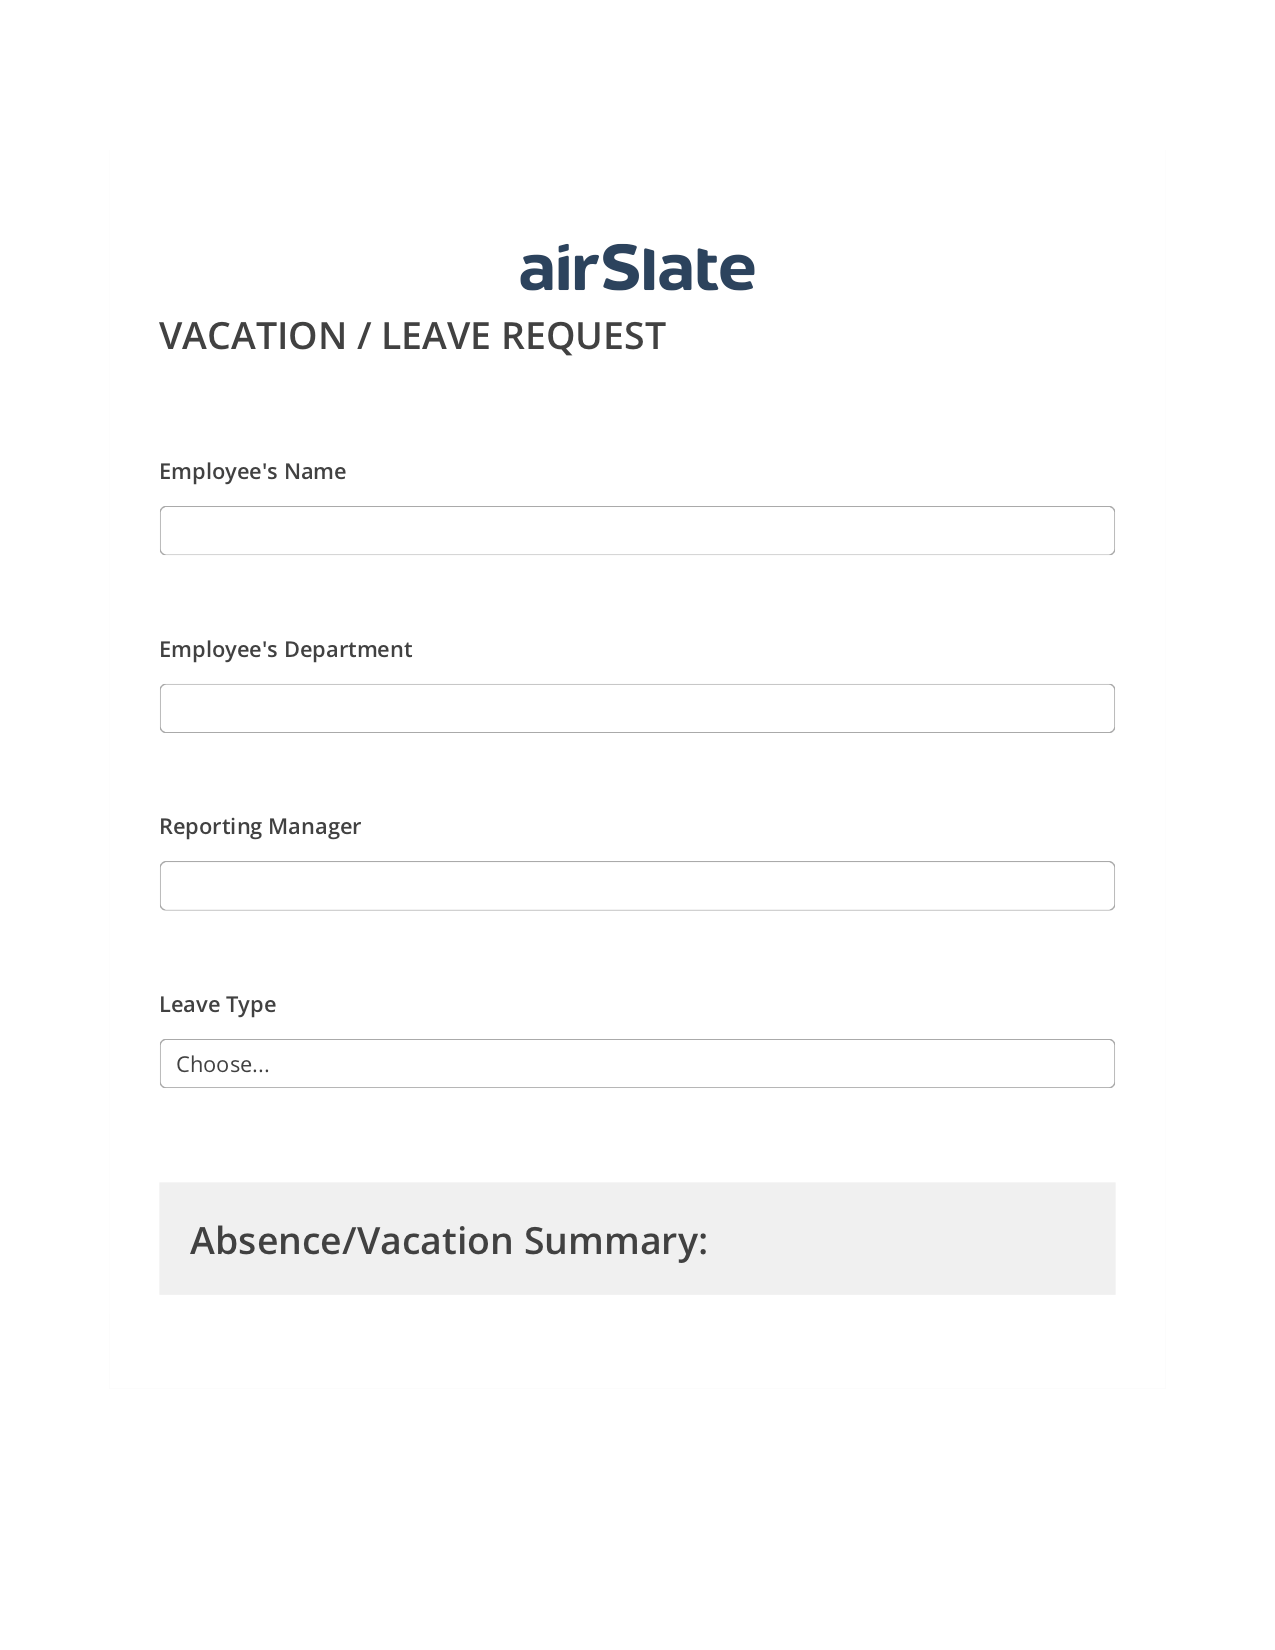 Vacation/Leave Request Workflow Pre-fill from MS Dynamics 365 Records, Create slate addon, Archive to OneDrive Bot